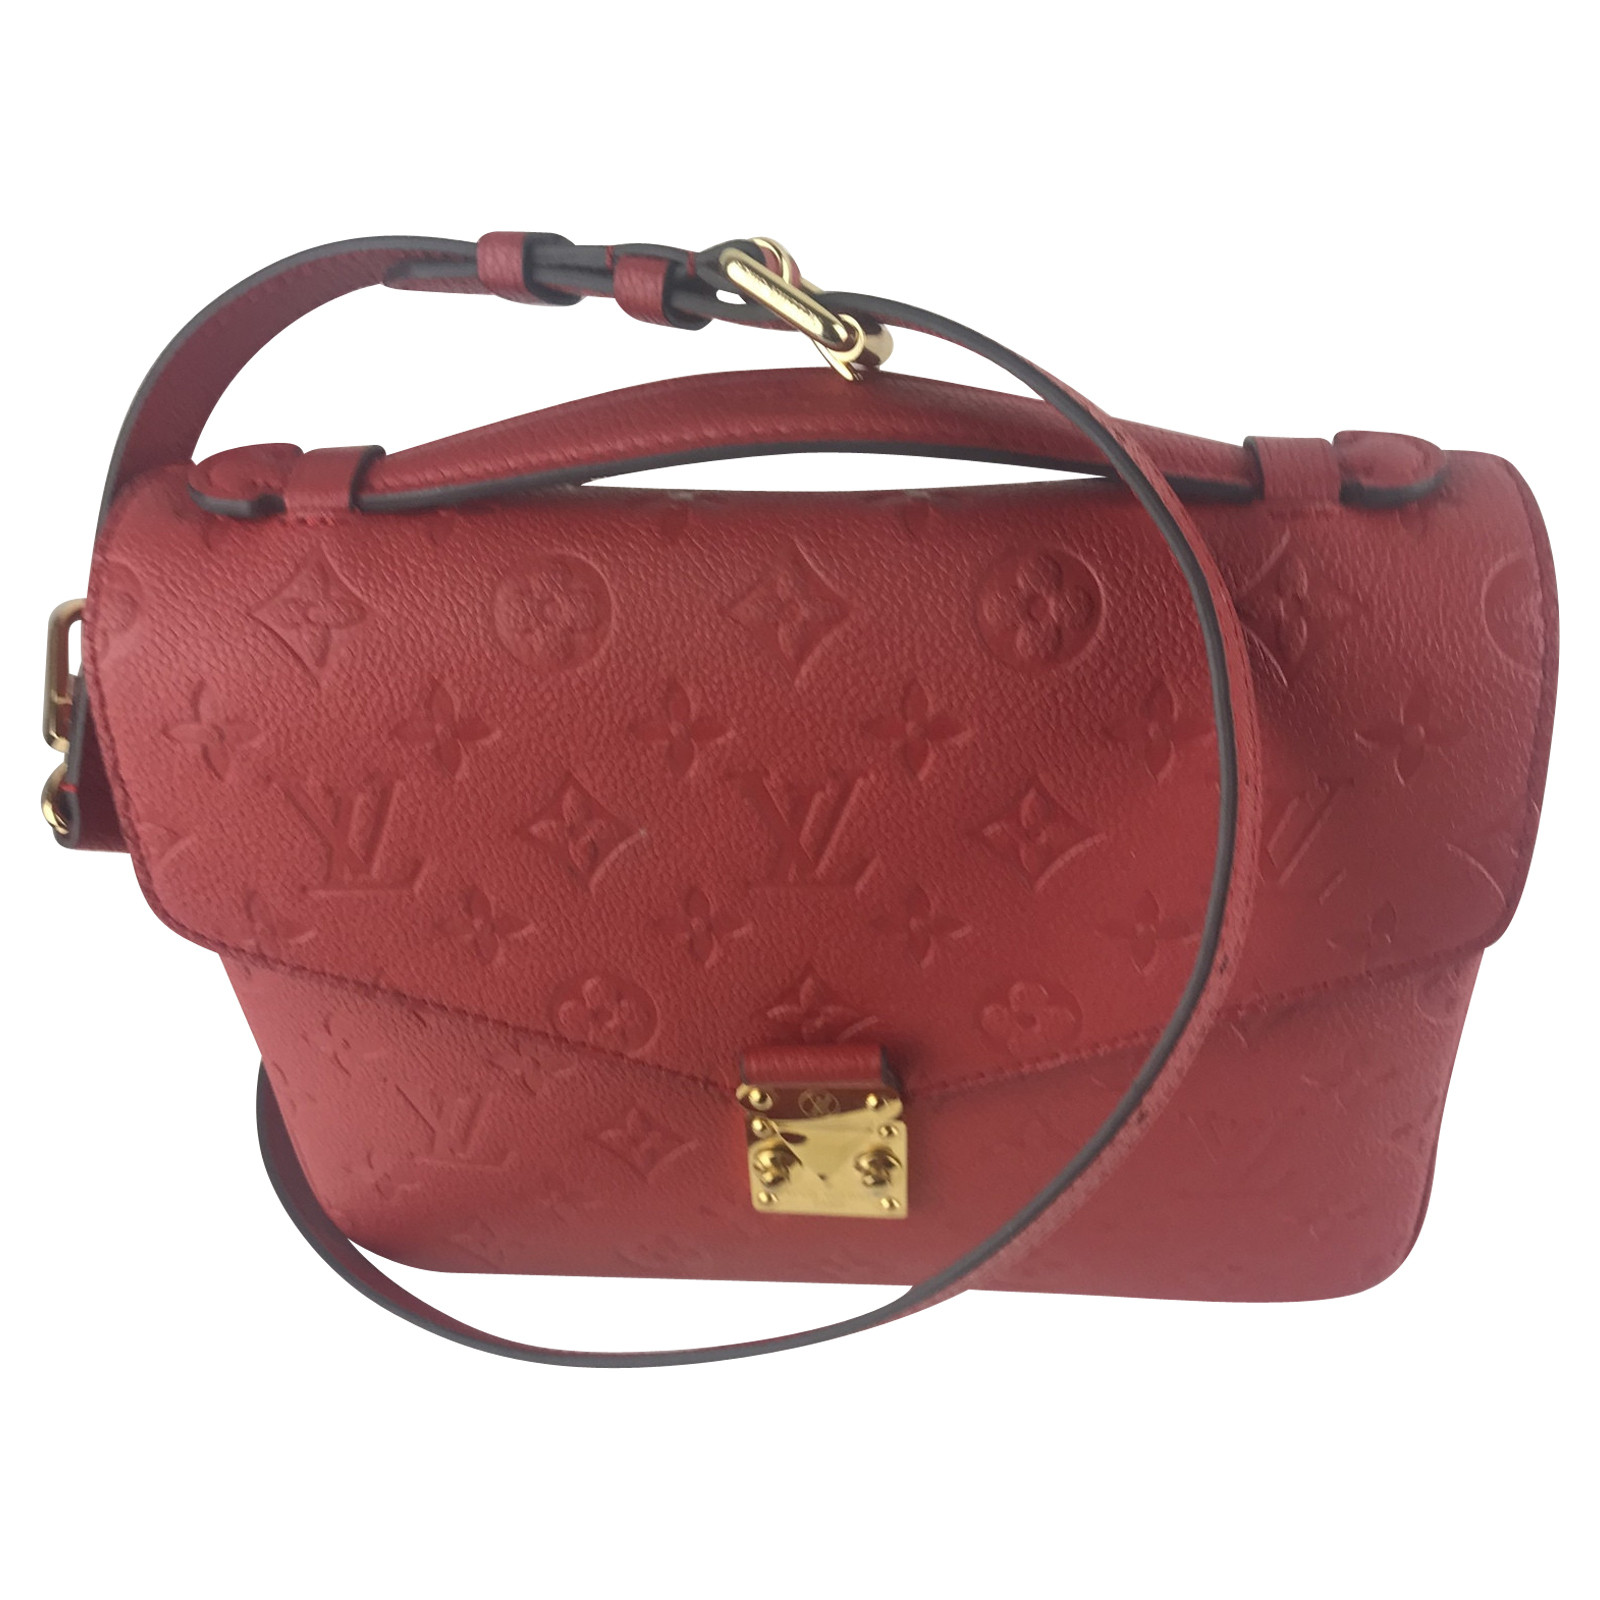 Louis Pochette Métis Leather in Red - Second Hand Louis Vuitton Pochette Métis Leather in Red buy used for 1500€ (7366509)